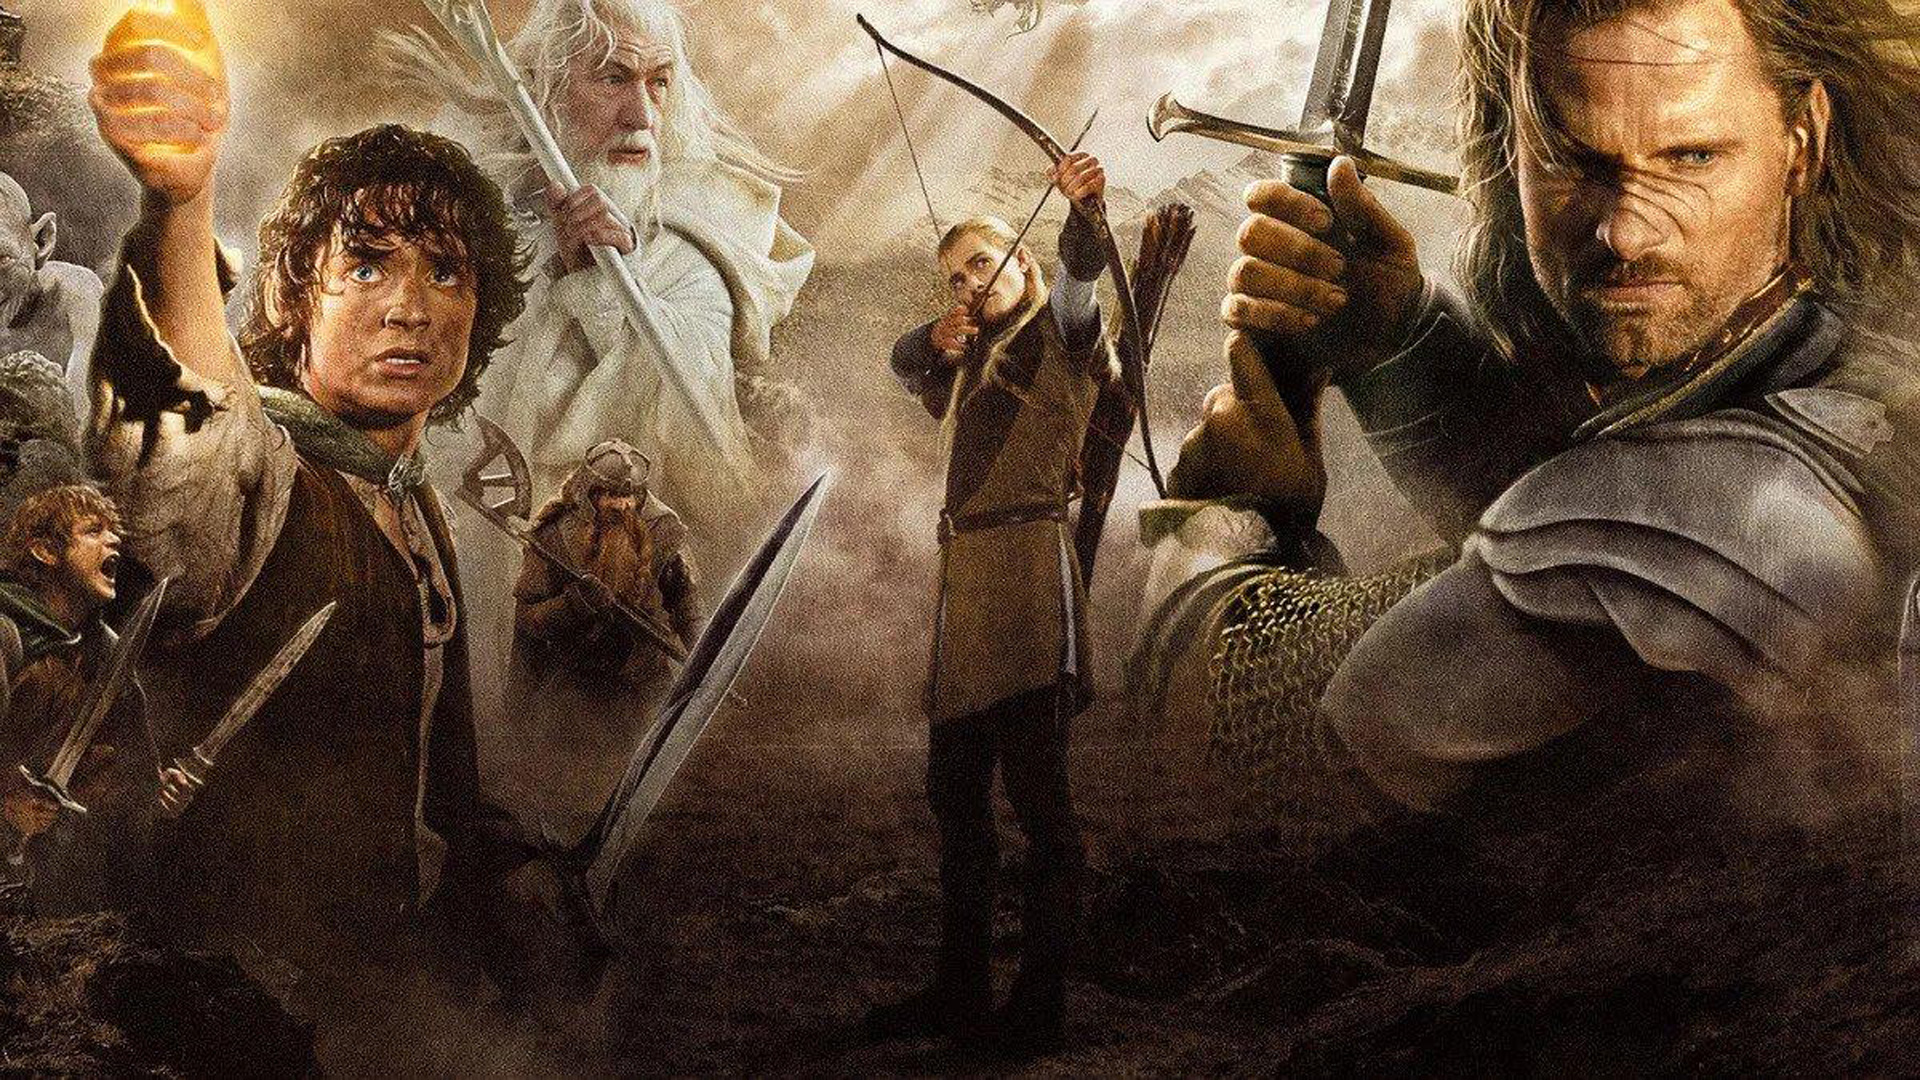 What will The Embracer Group, Lord Of The Rings partnership look like?